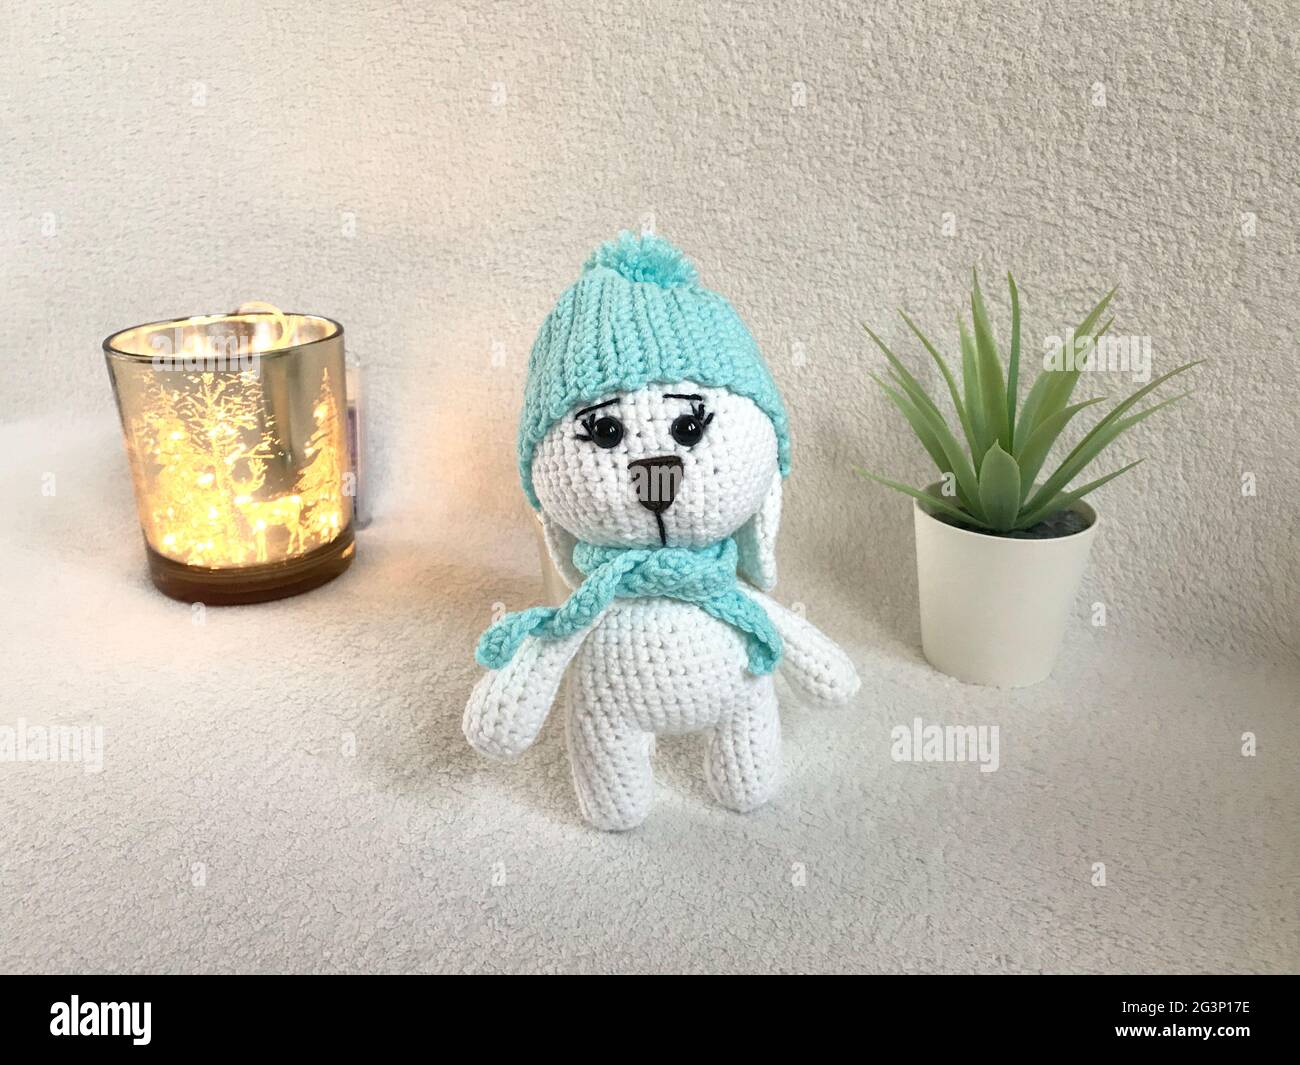 Handmade Crochet Animal Toy - Amigurumi Stuffed Toy - Cute Bunny with a Hat and Scarf Stock Photo